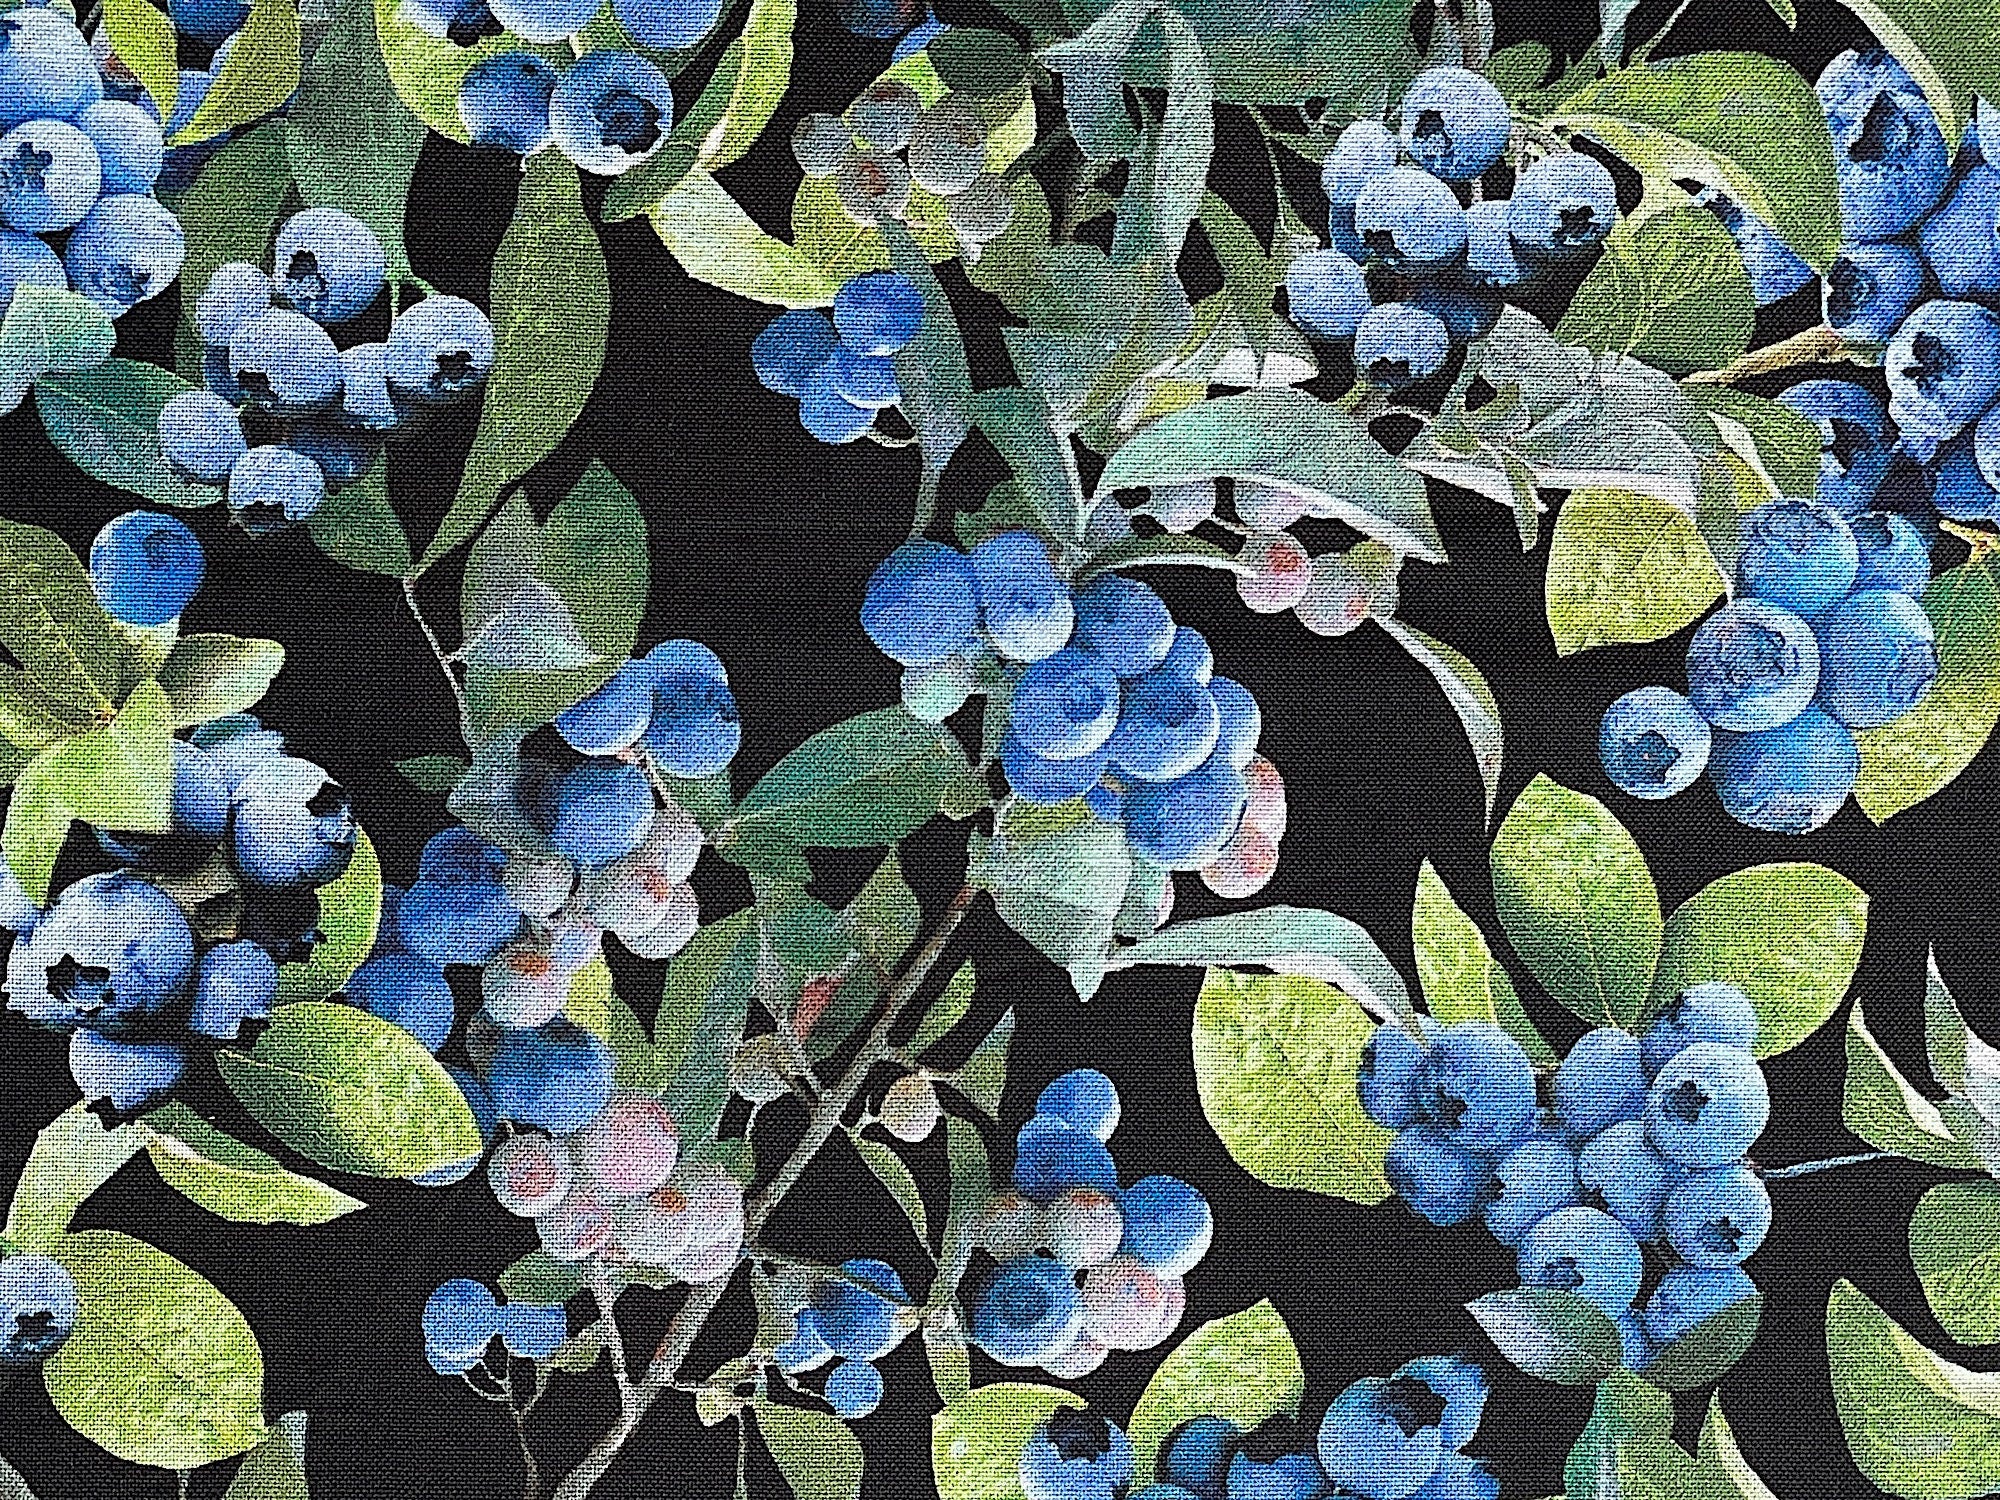 Close up of blueberries on a blueberry plant.